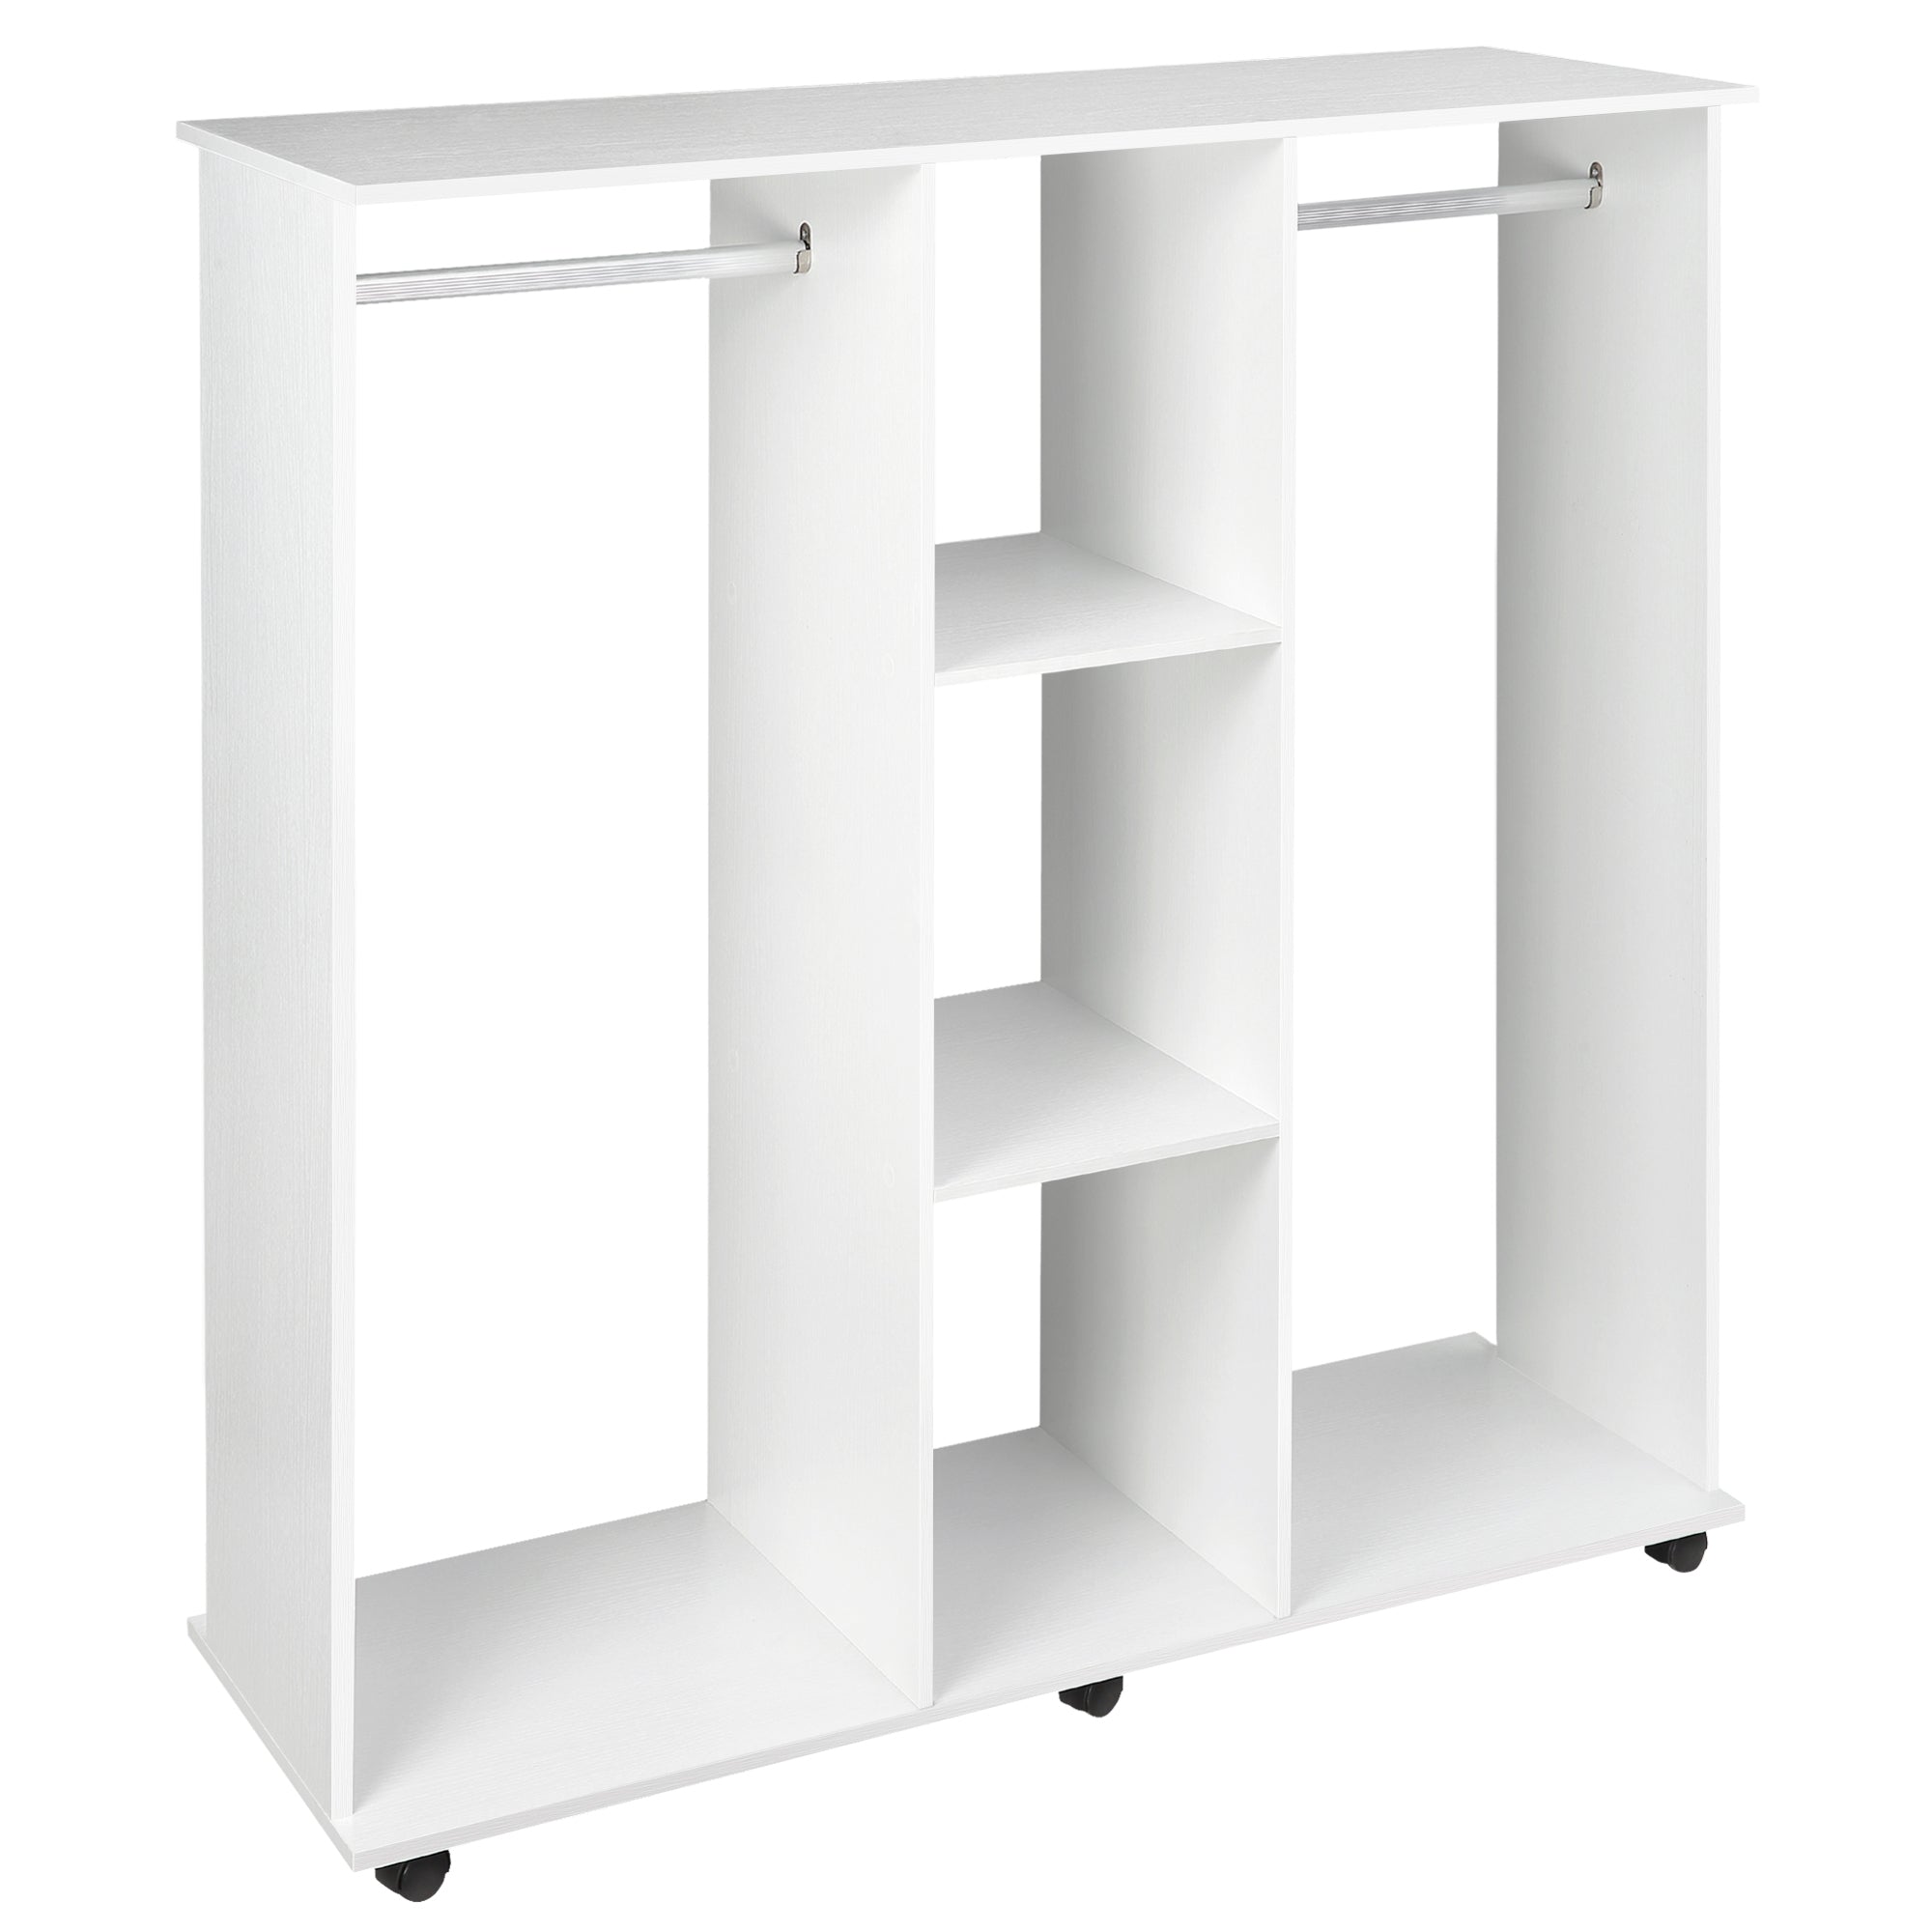 Double Mobile Open Wardrobe With Clothes Hanging Rails Storage Shelves Organizer Bedroom Furniture - White-0